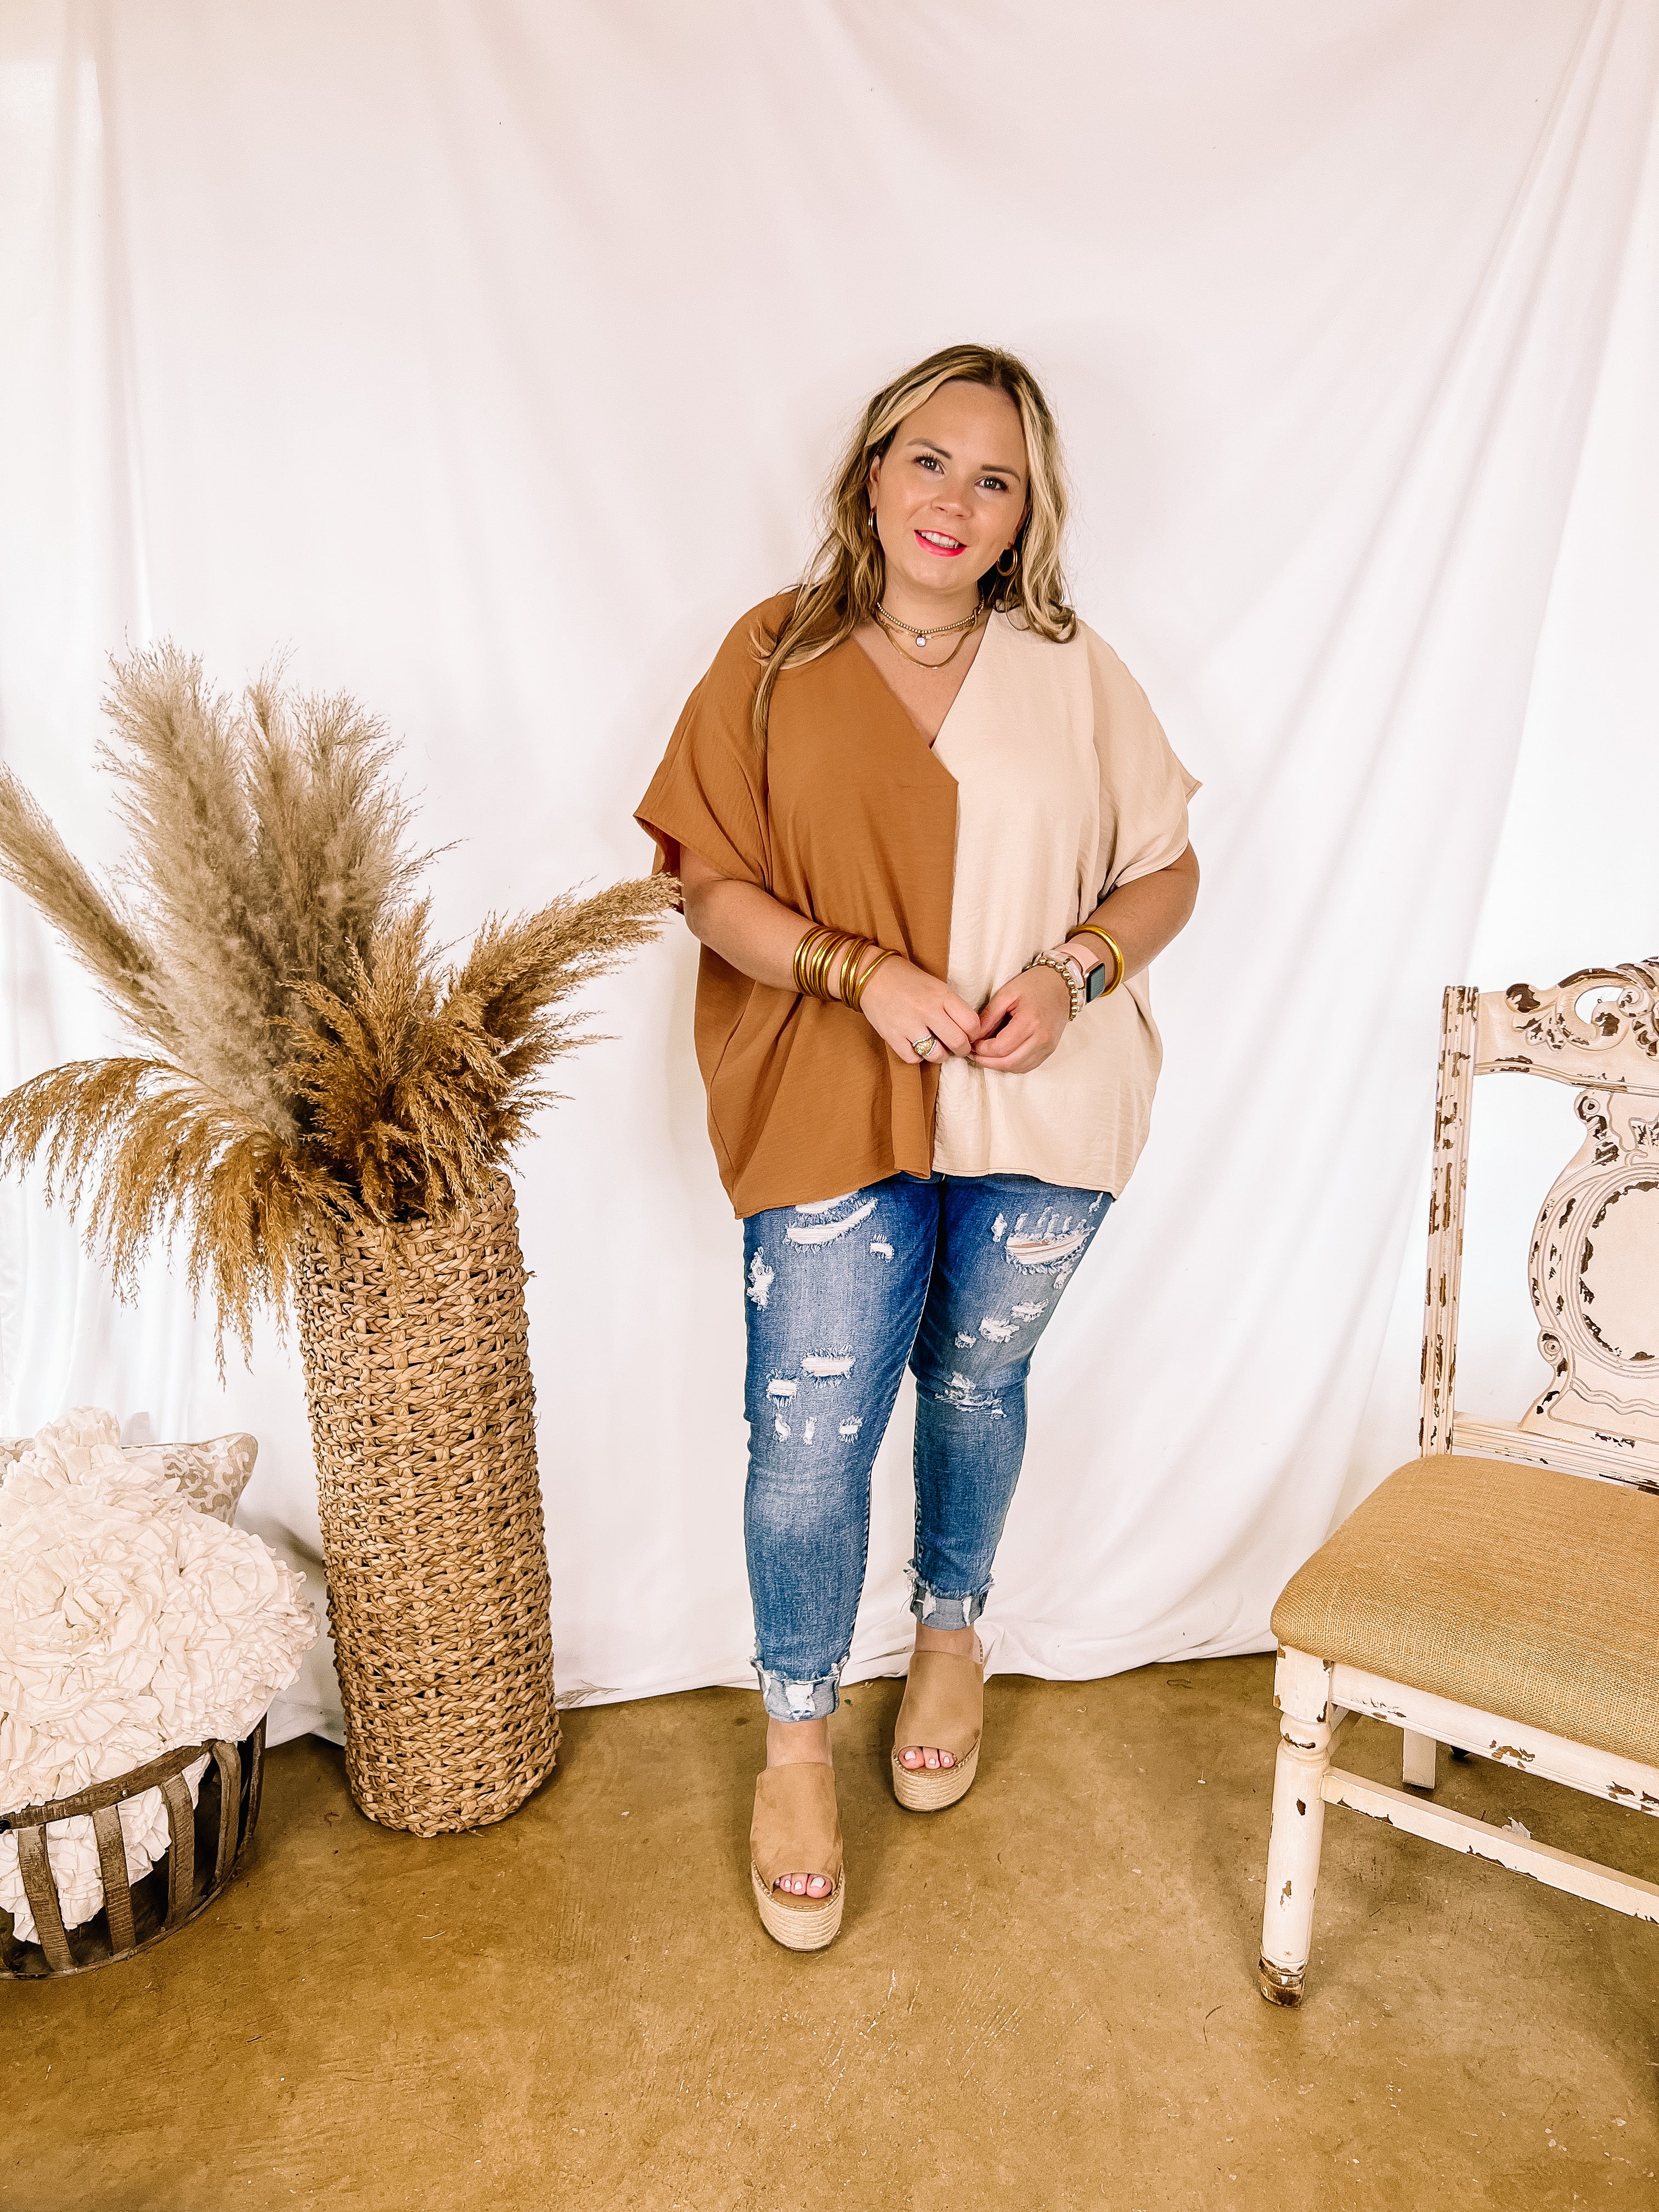 Weekend Out V Neck Placket Color Block Short Sleeve Top in Beige and Clay Brown - Giddy Up Glamour Boutique